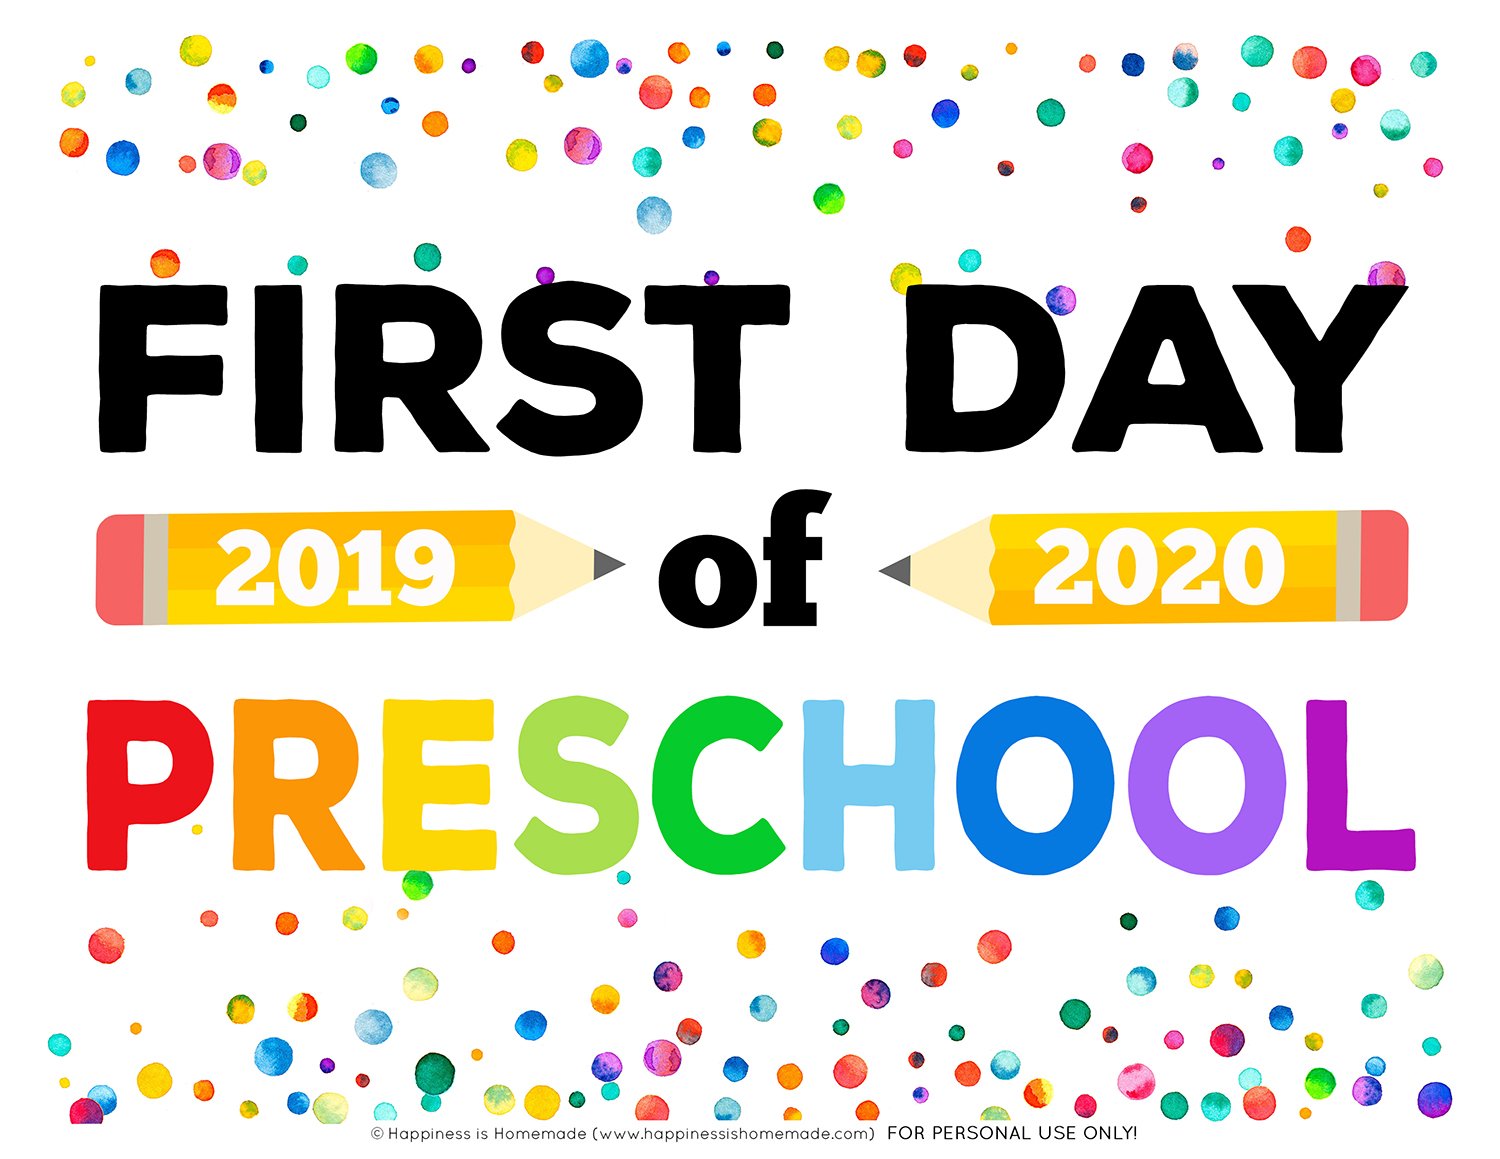 Free First Day Of Preschool Printables